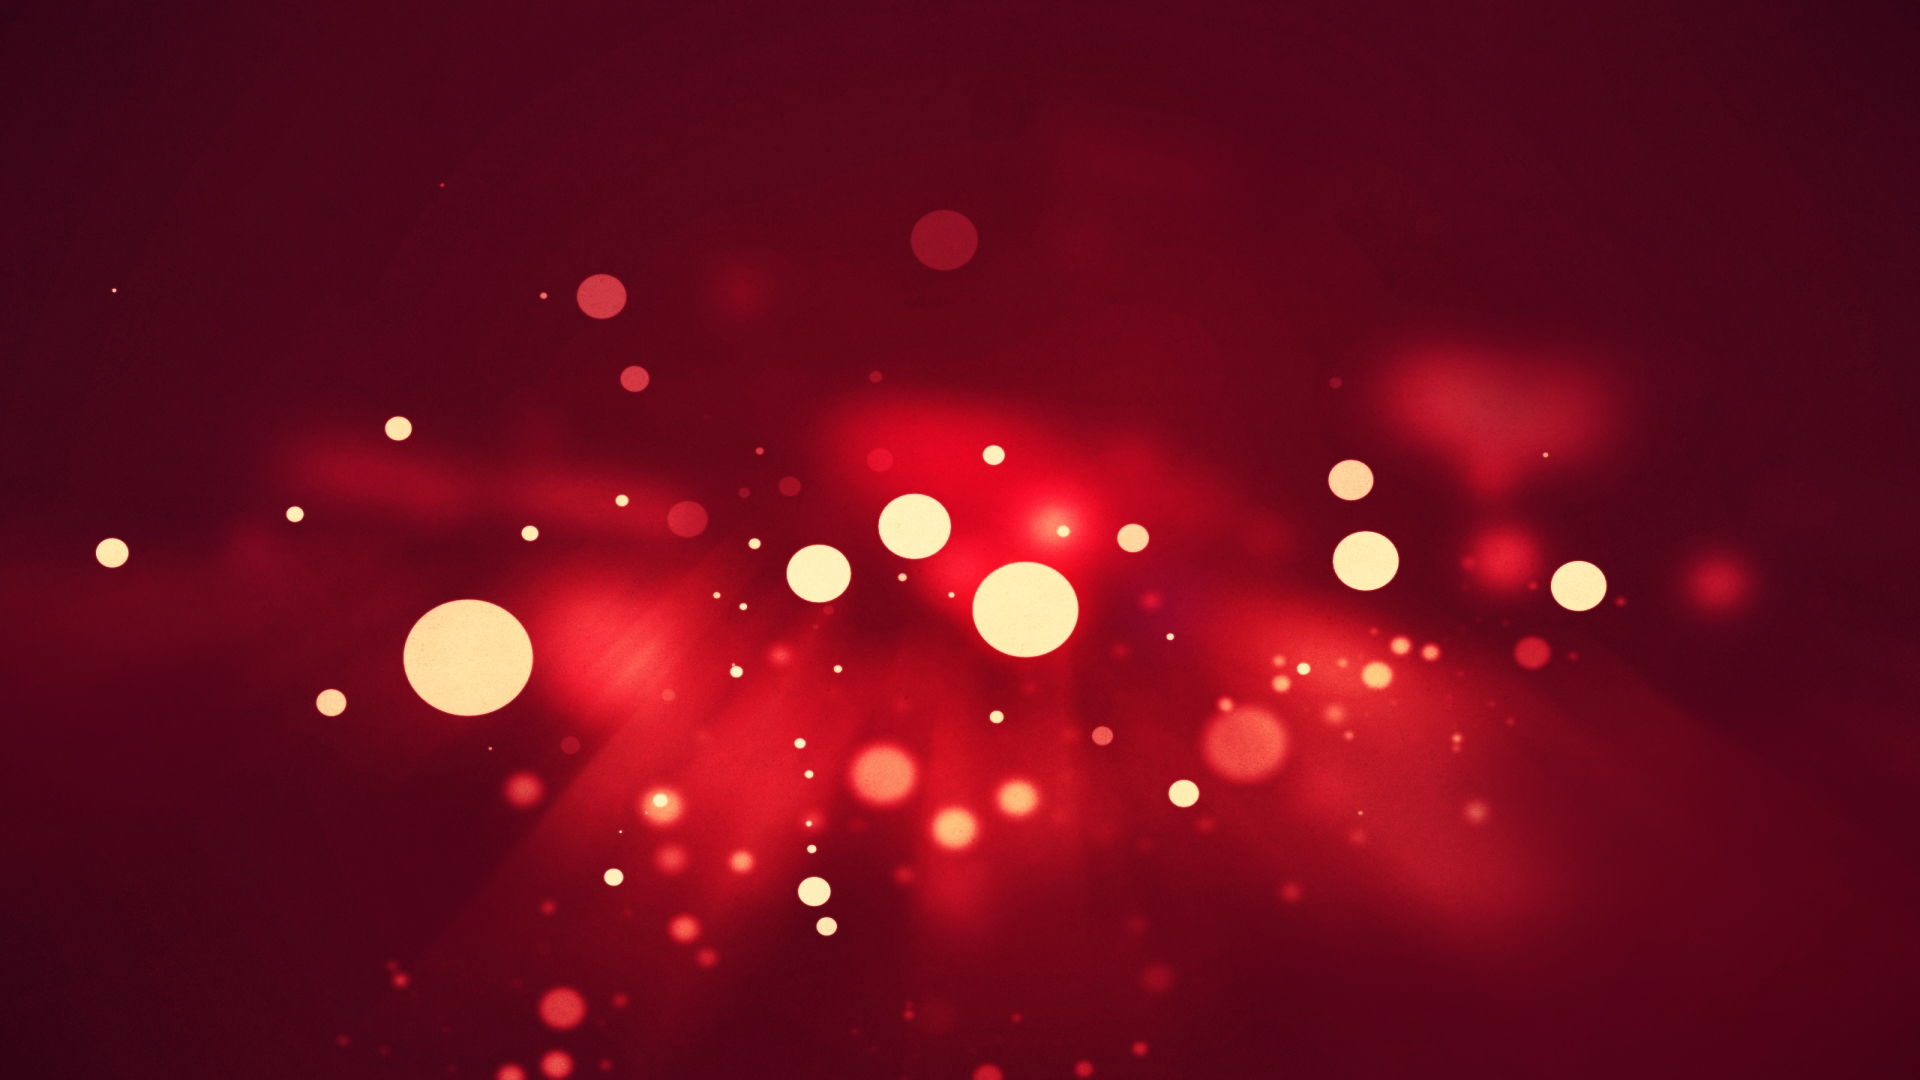 White Dots Red Background Hd Wallpaper - Red And White Background